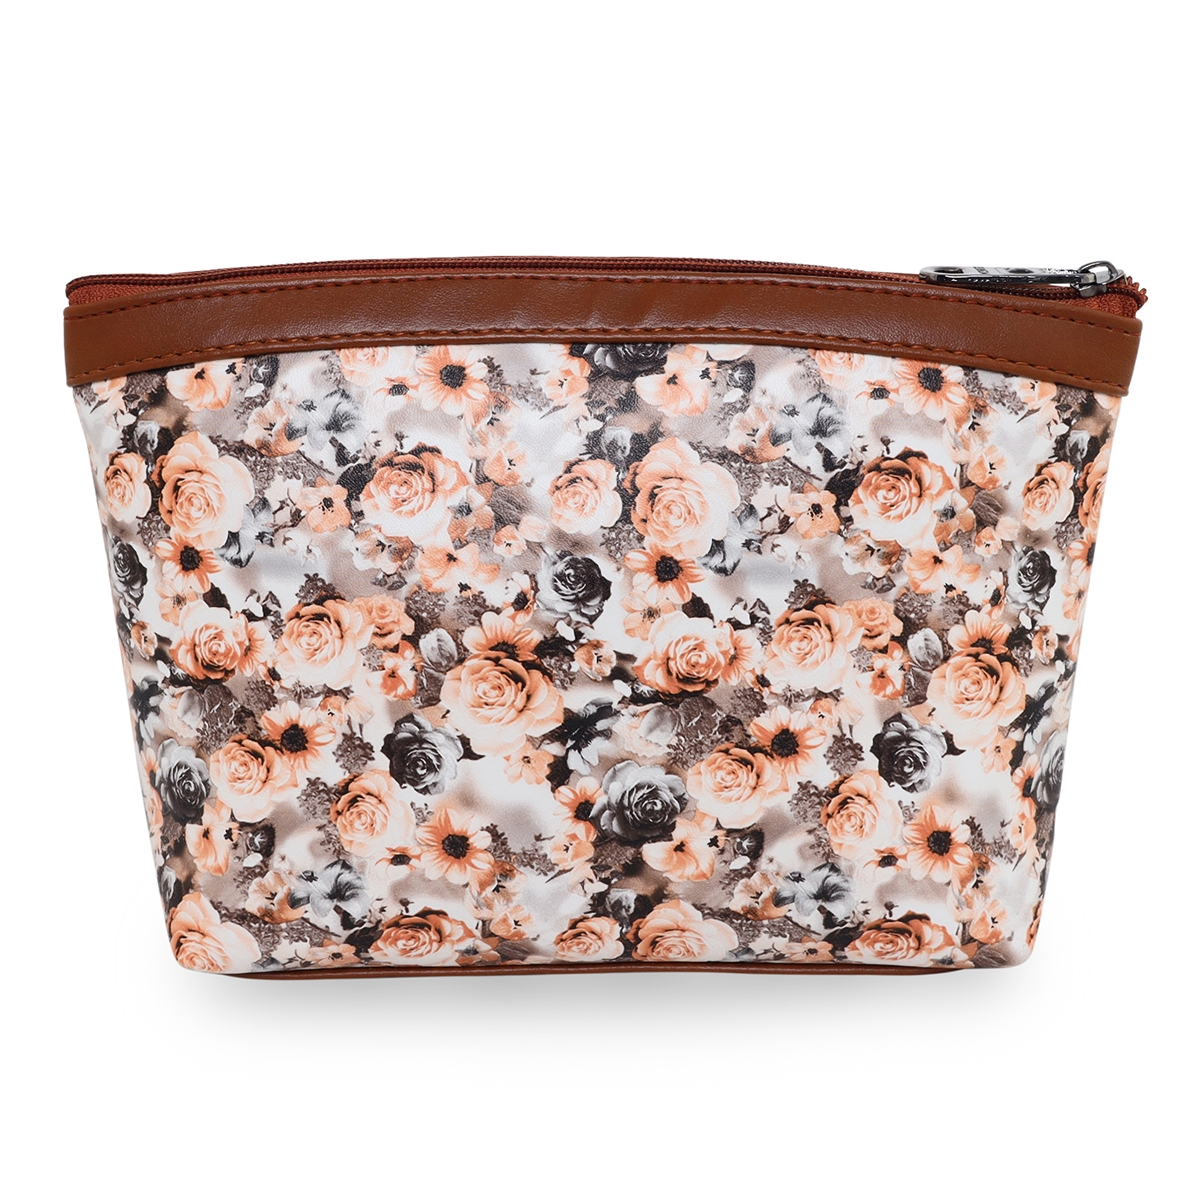 ESBEDA | ESBEDA Tan Color Floral Print Pouch For Women Pack of 2 3